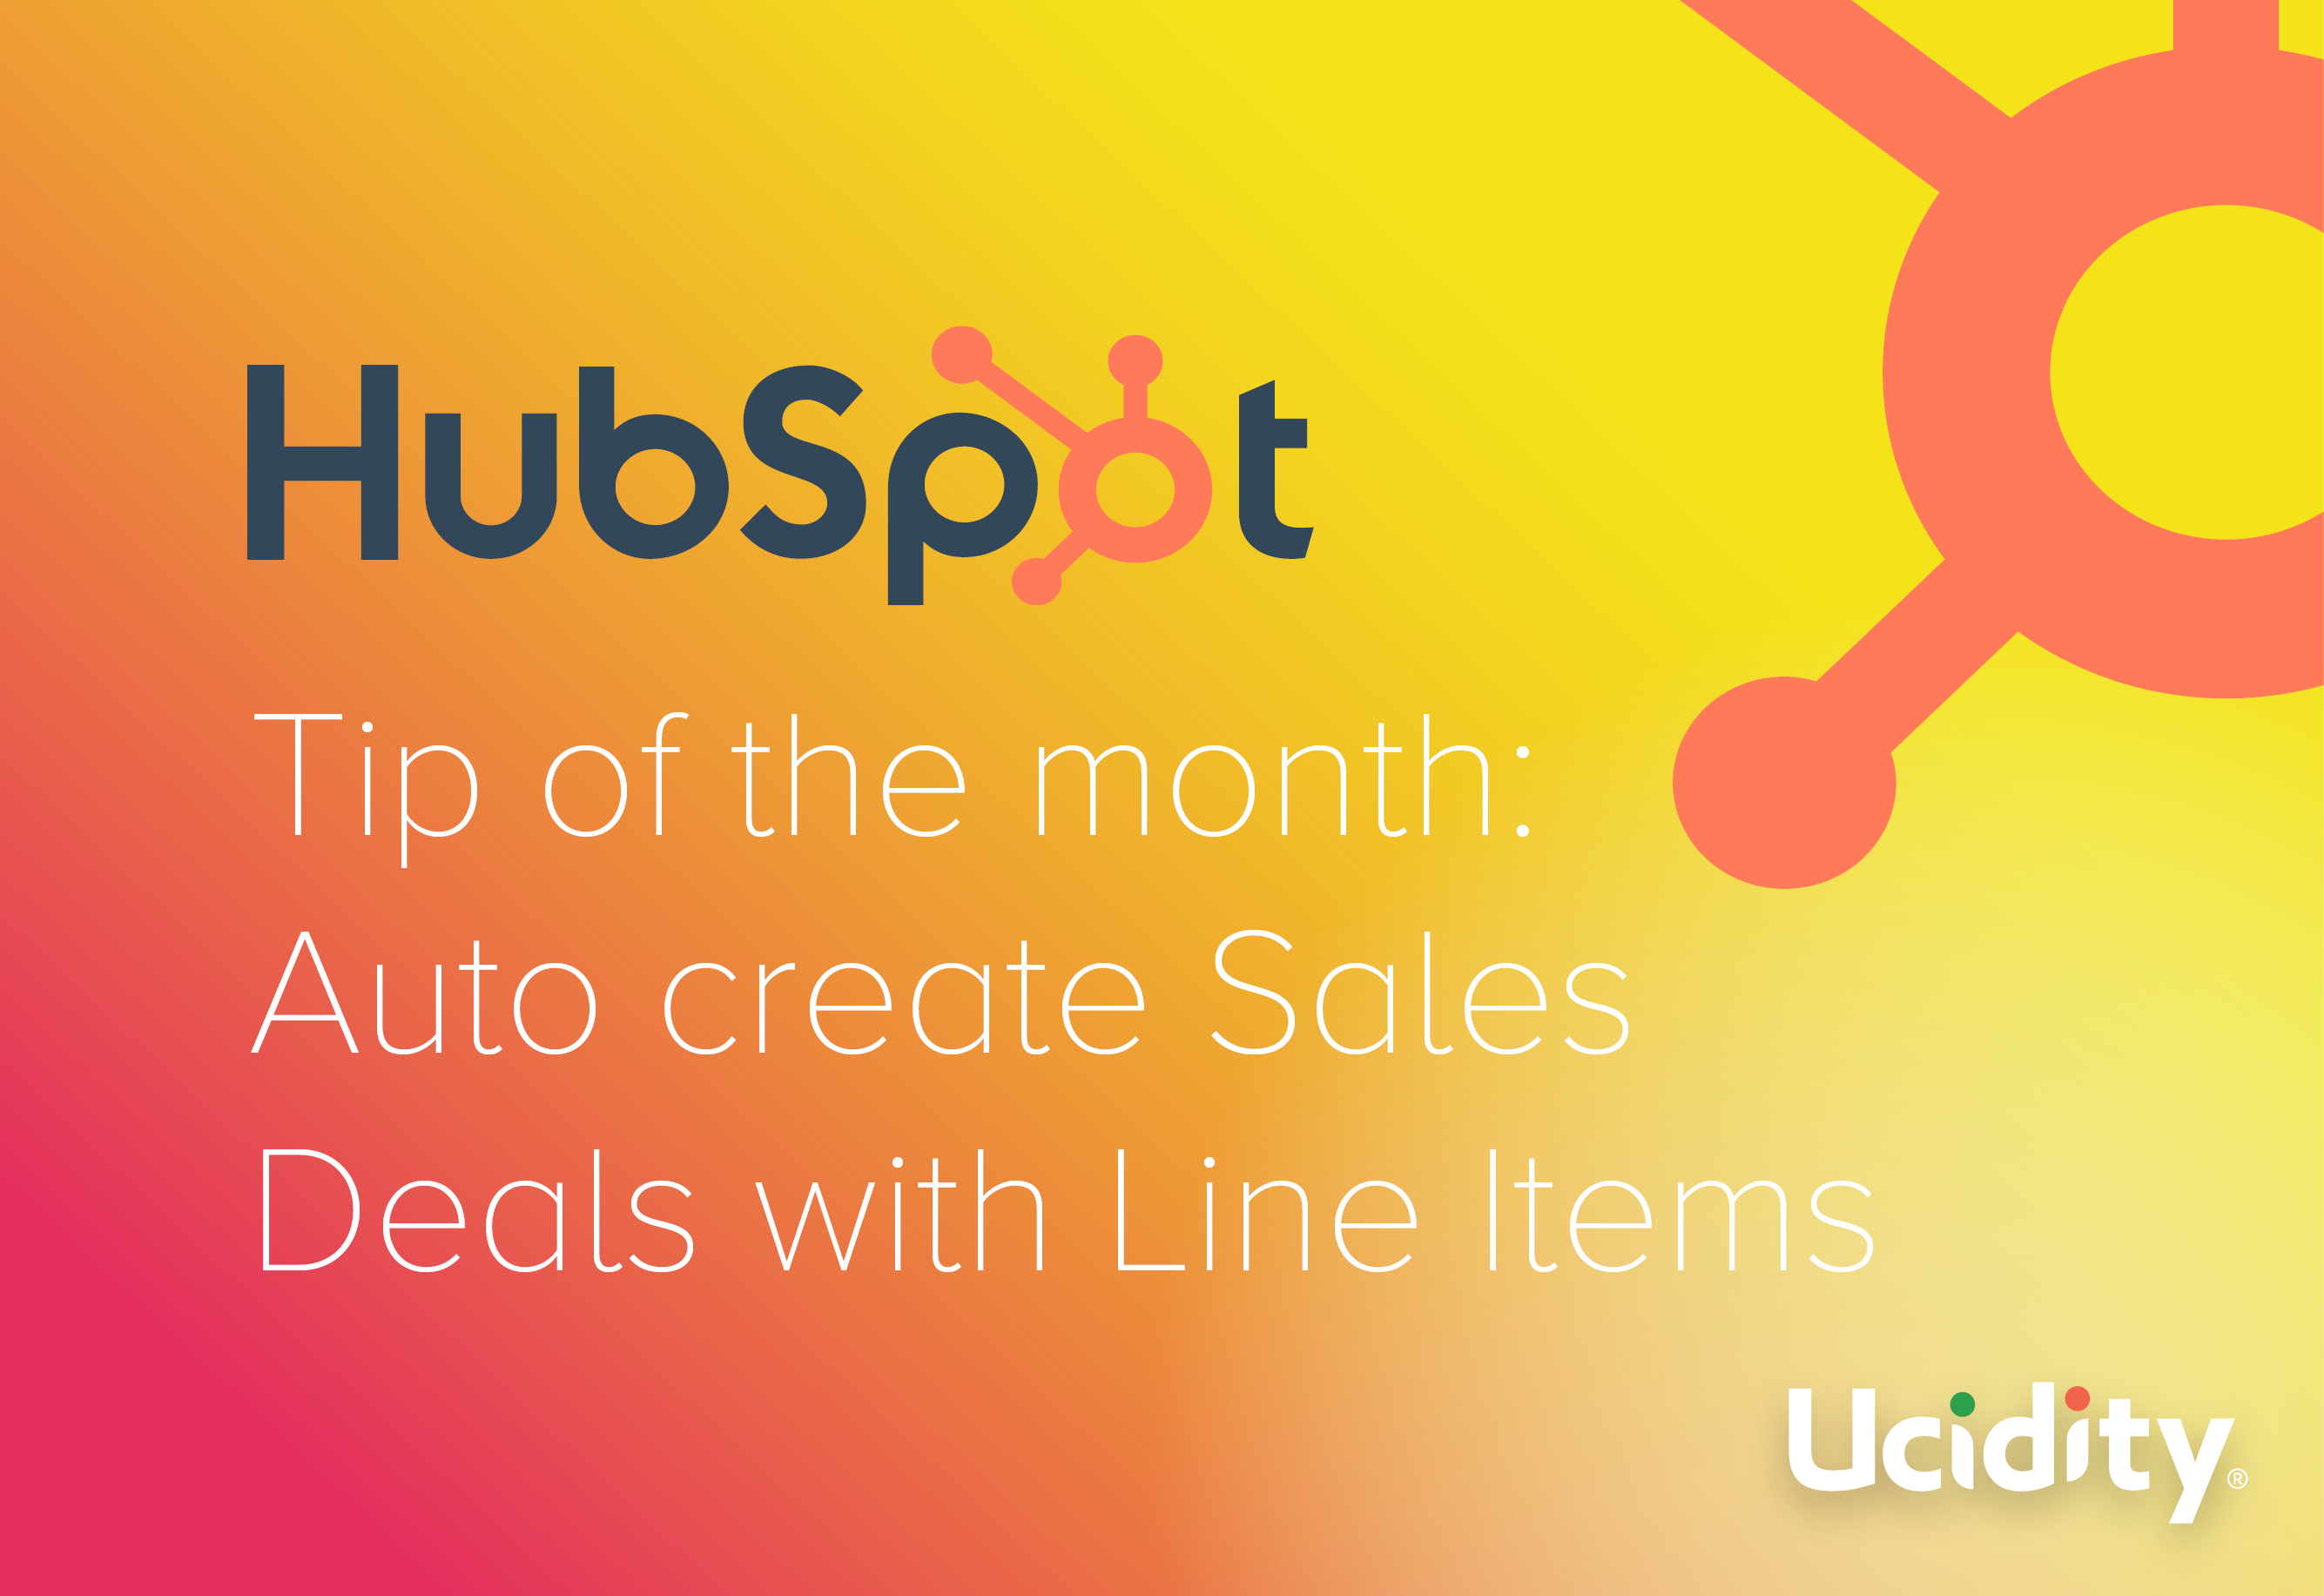 HubSpot Tip of the Month: Auto create Sales Deals with Line Items